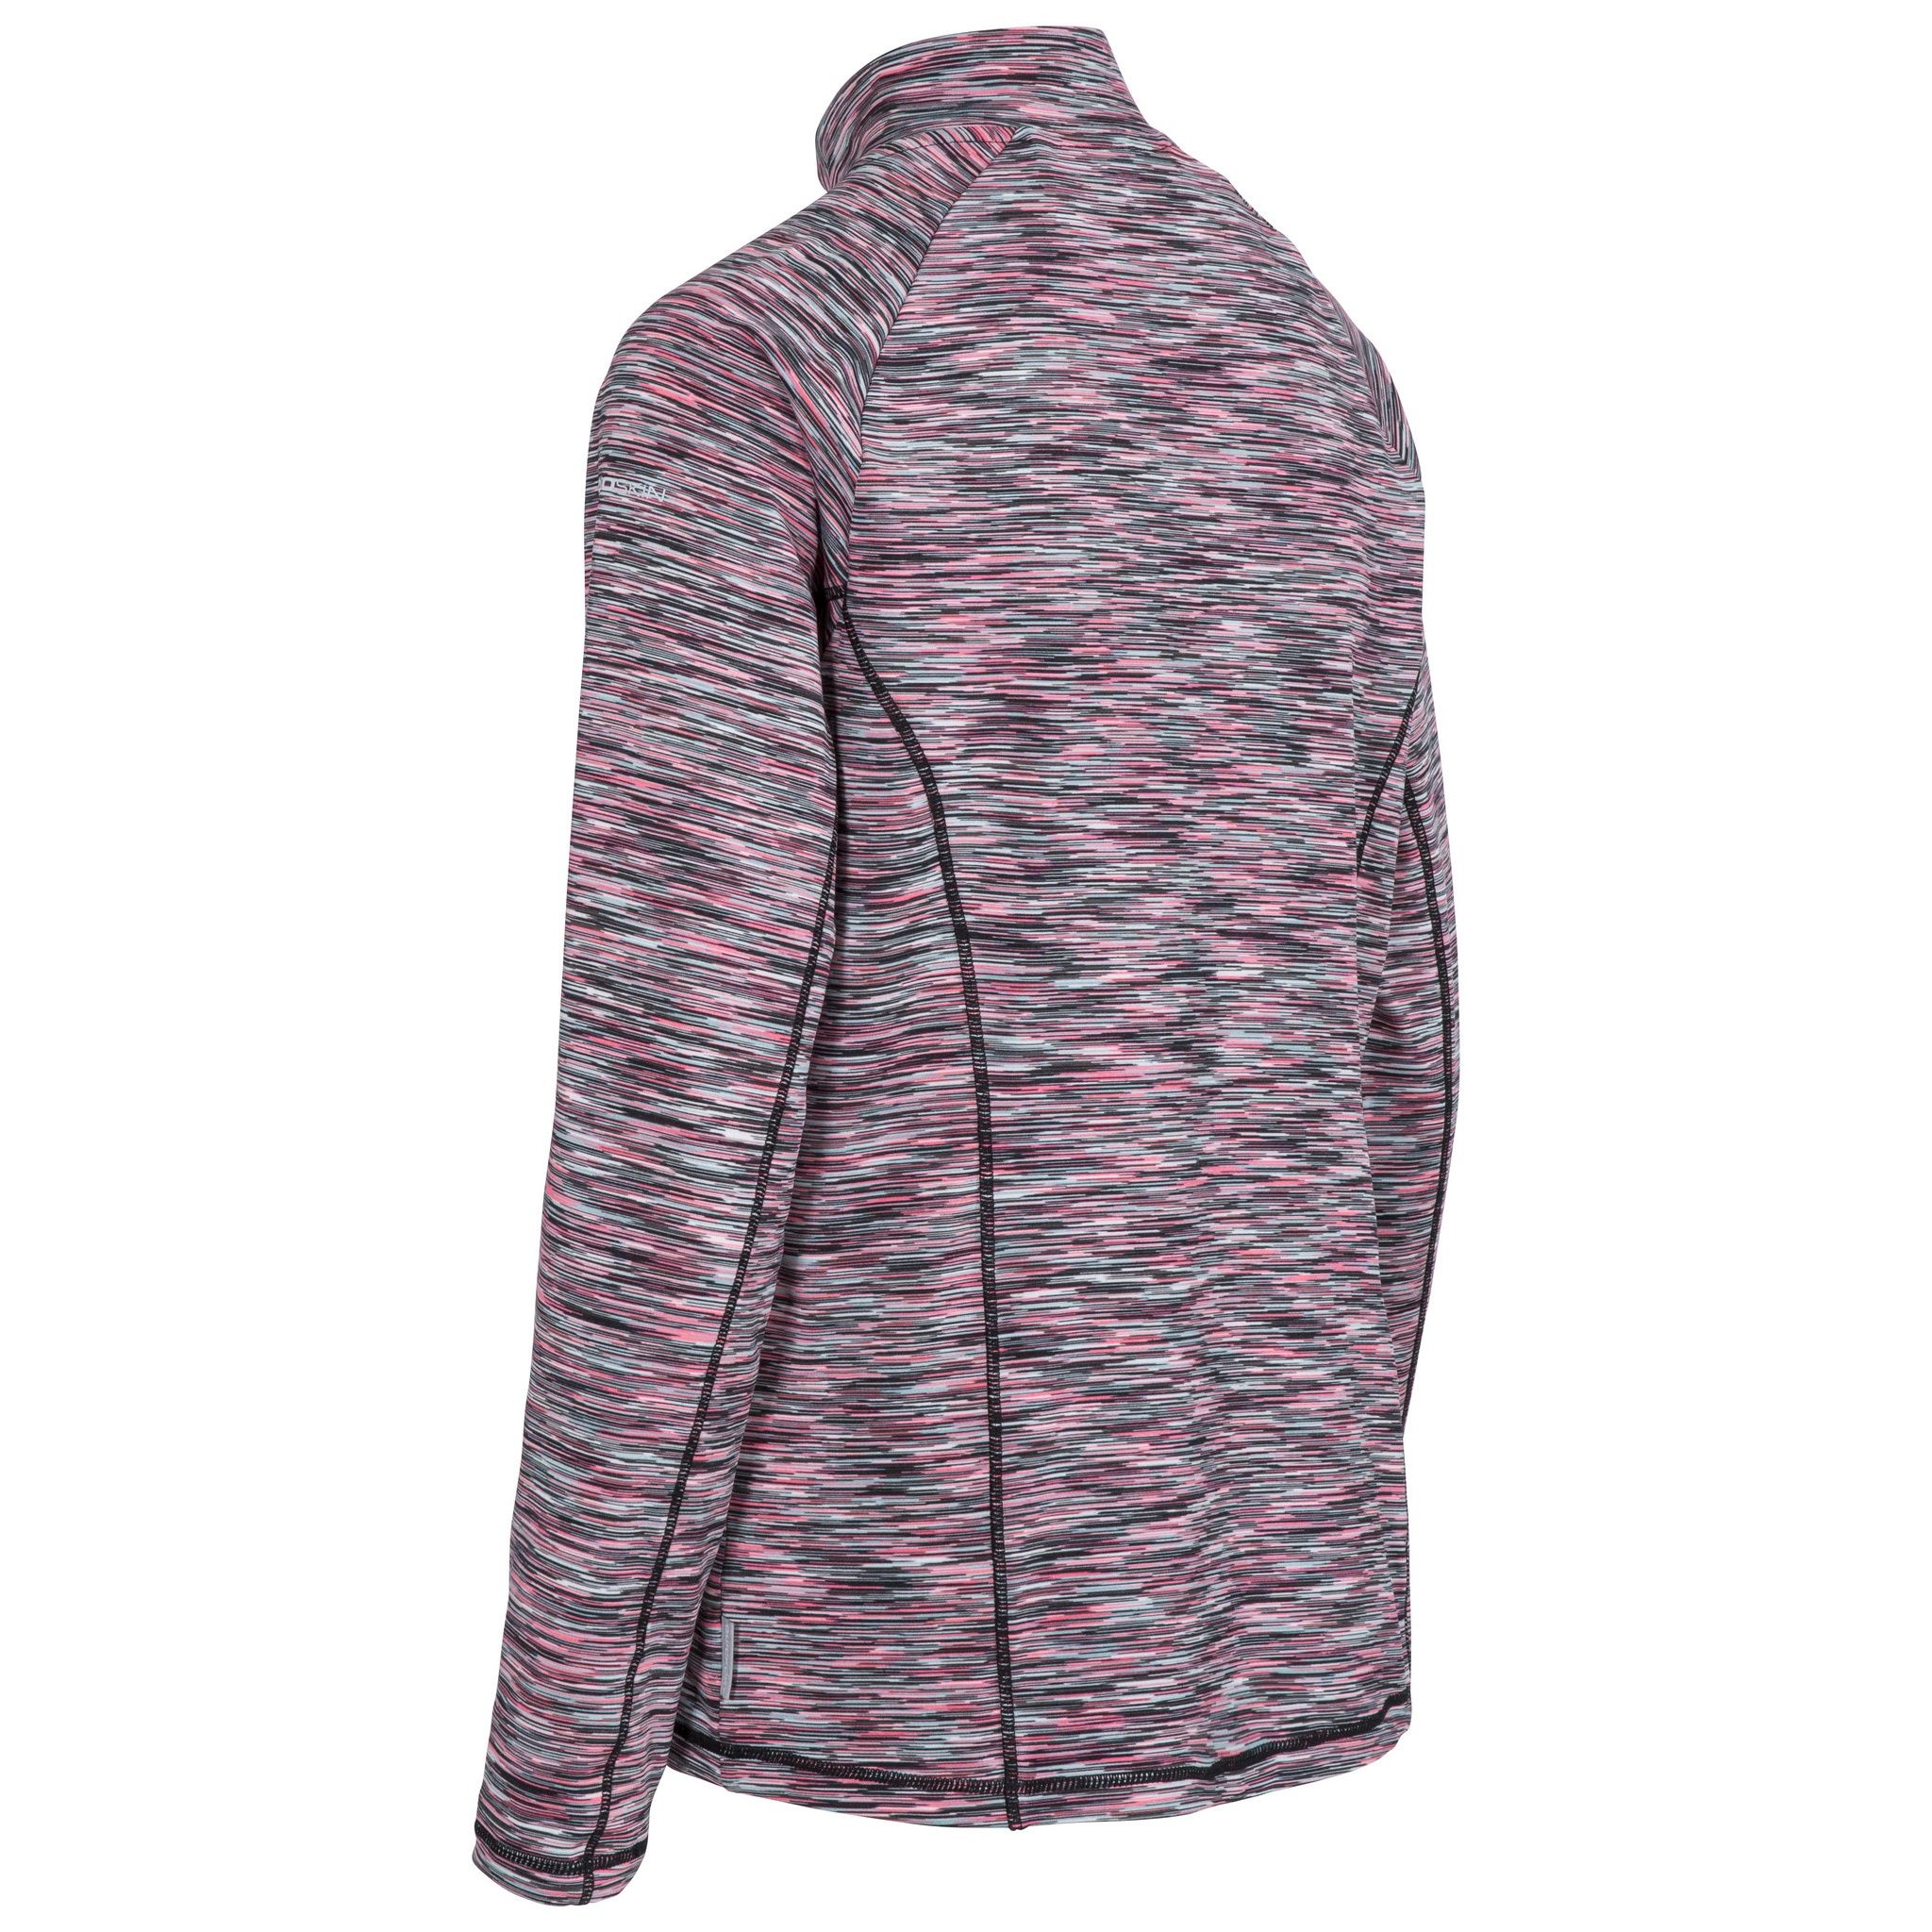 1/2 zip neck. Long sleeve. Small rear zip pocket. Contrast inner back neck binding. Reflective printed logos. Wicking. Quick dry. 87% Polyester, 13% Elastane. Trespass Womens Chest Sizing (approx): XS/8 - 32in/81cm, S/10 - 34in/86cm, M/12 - 36in/91.4cm, L/14 - 38in/96.5cm, XL/16 - 40in/101.5cm, XXL/18 - 42in/106.5cm.